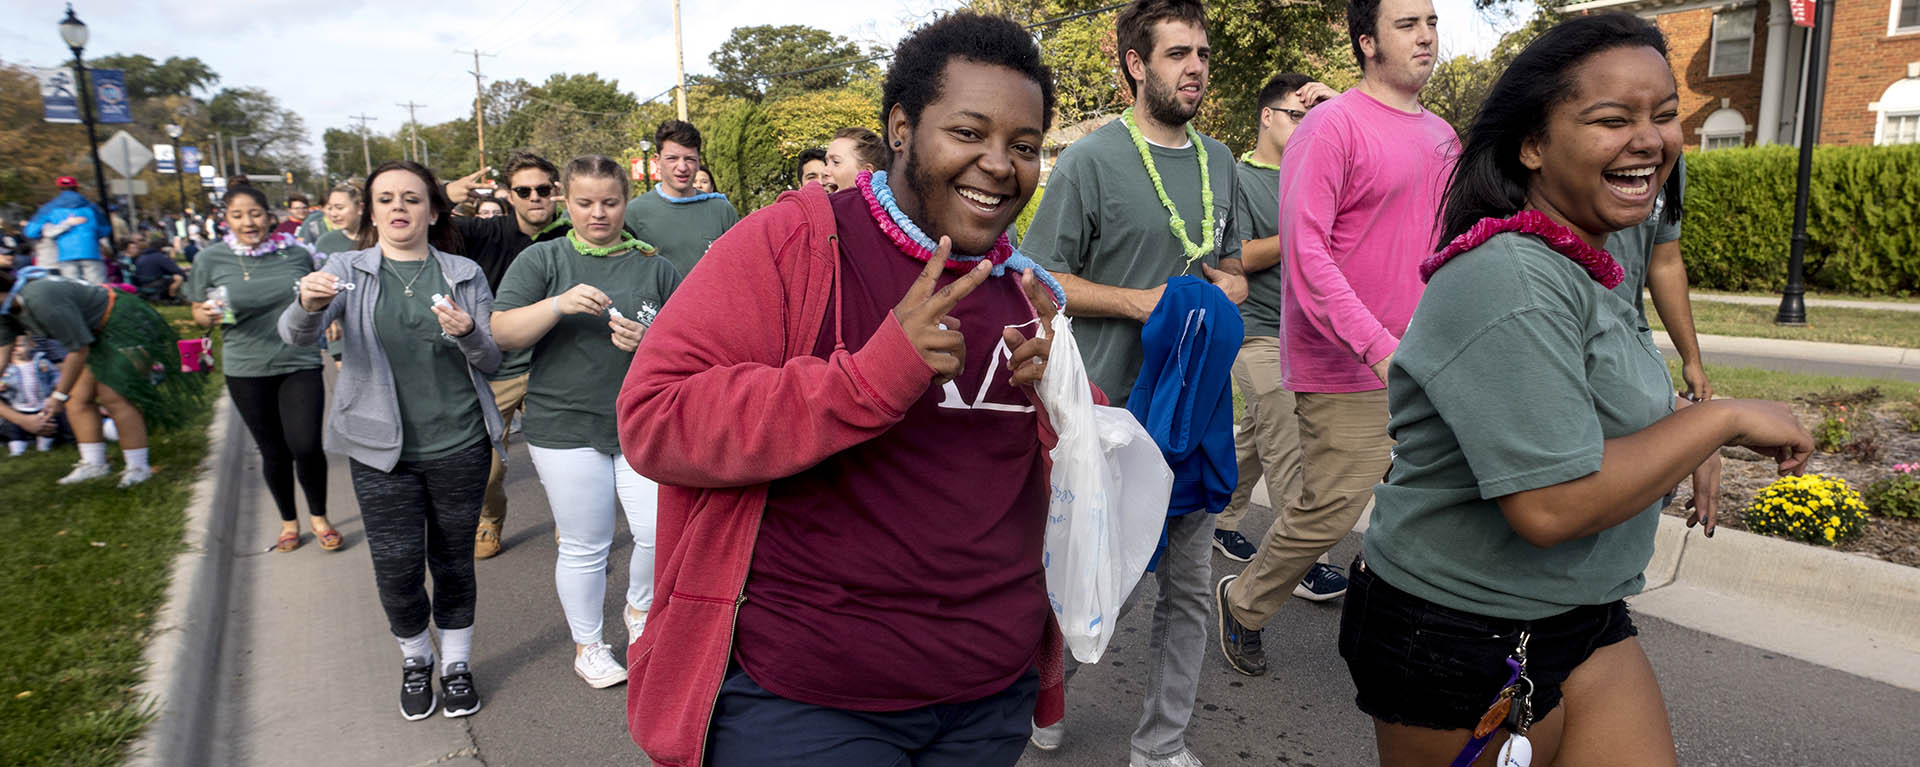 A student smiles while walking in the homecoming parade.